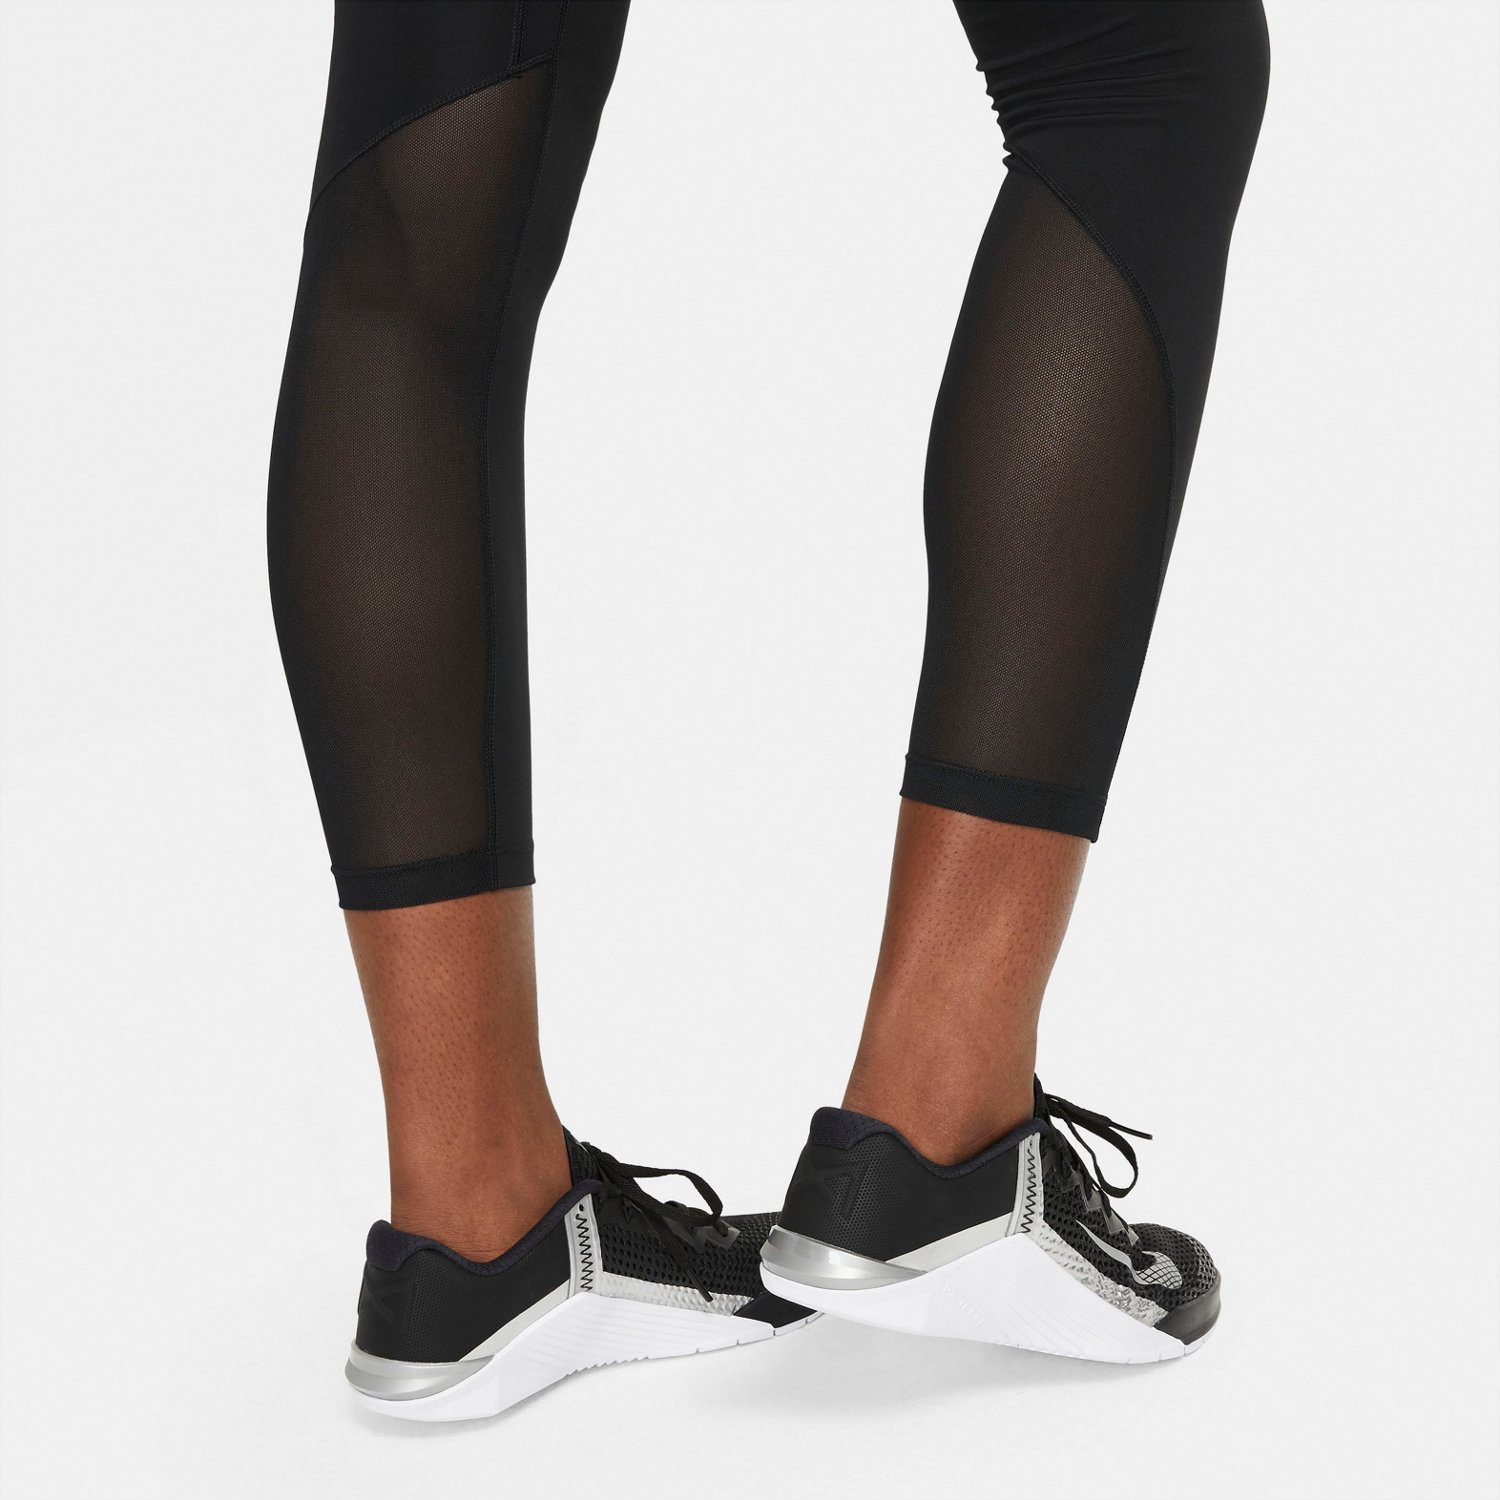 Nike Women's One Mid Rise 2.0 7/8 Tights | Academy